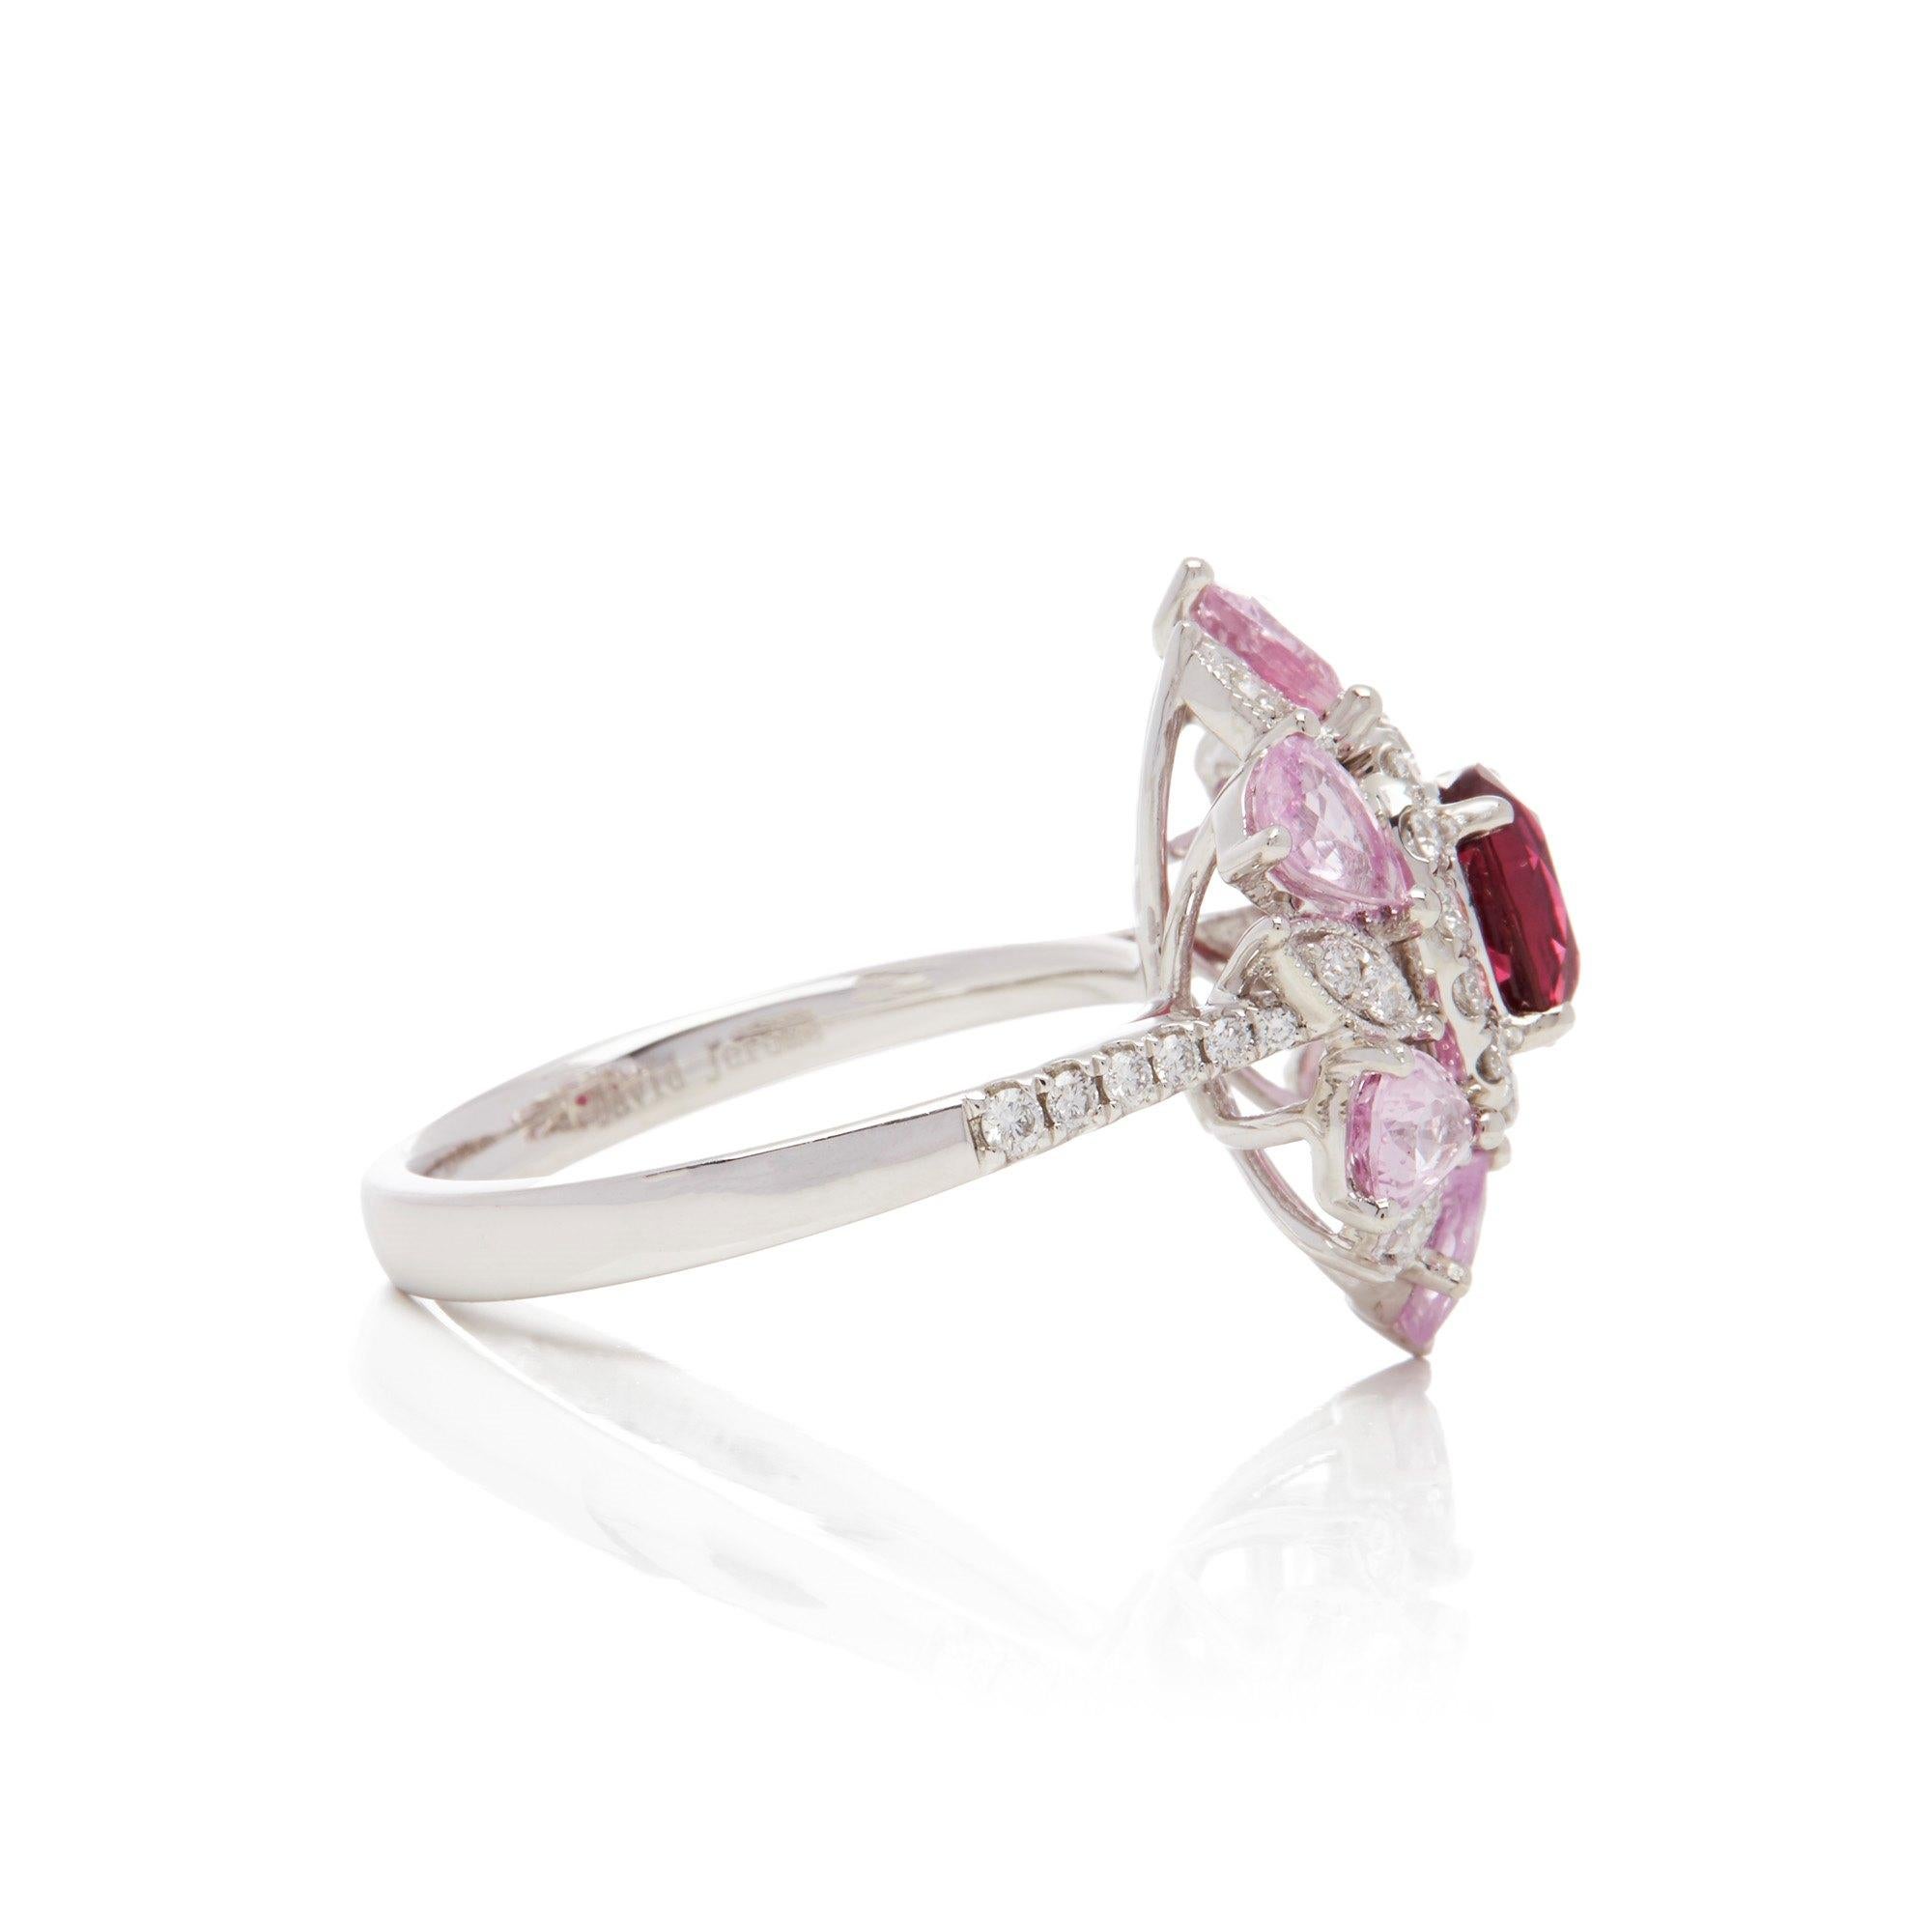 Contemporary David Jerome Certified 1.08 Carat Untreated Mozambique Ruby Oval Cluster Ring